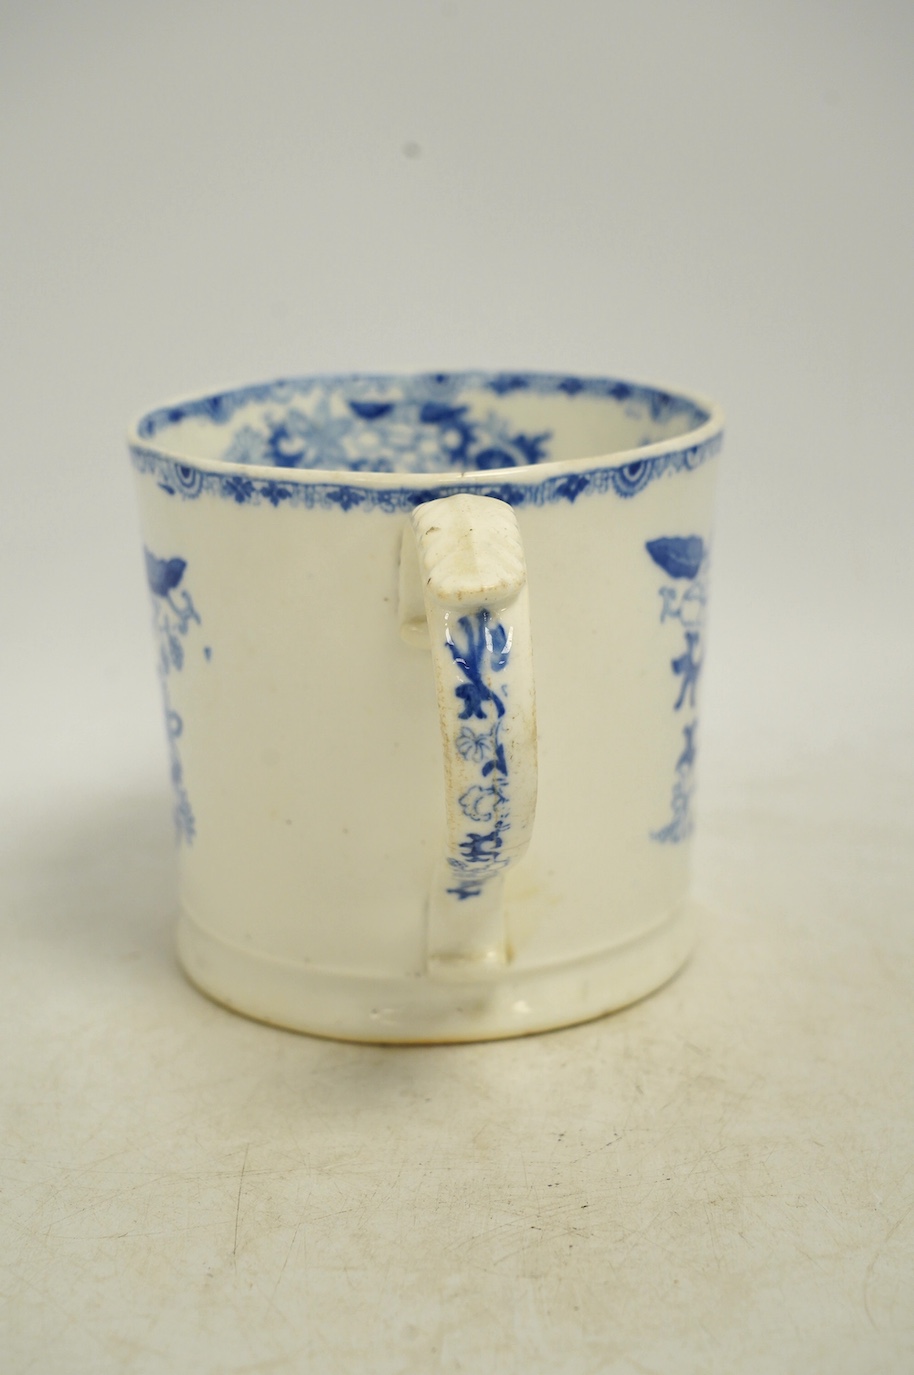 An early Victorian blue and white bone china mug, 13cm high. Condition - fair, crack to the handle